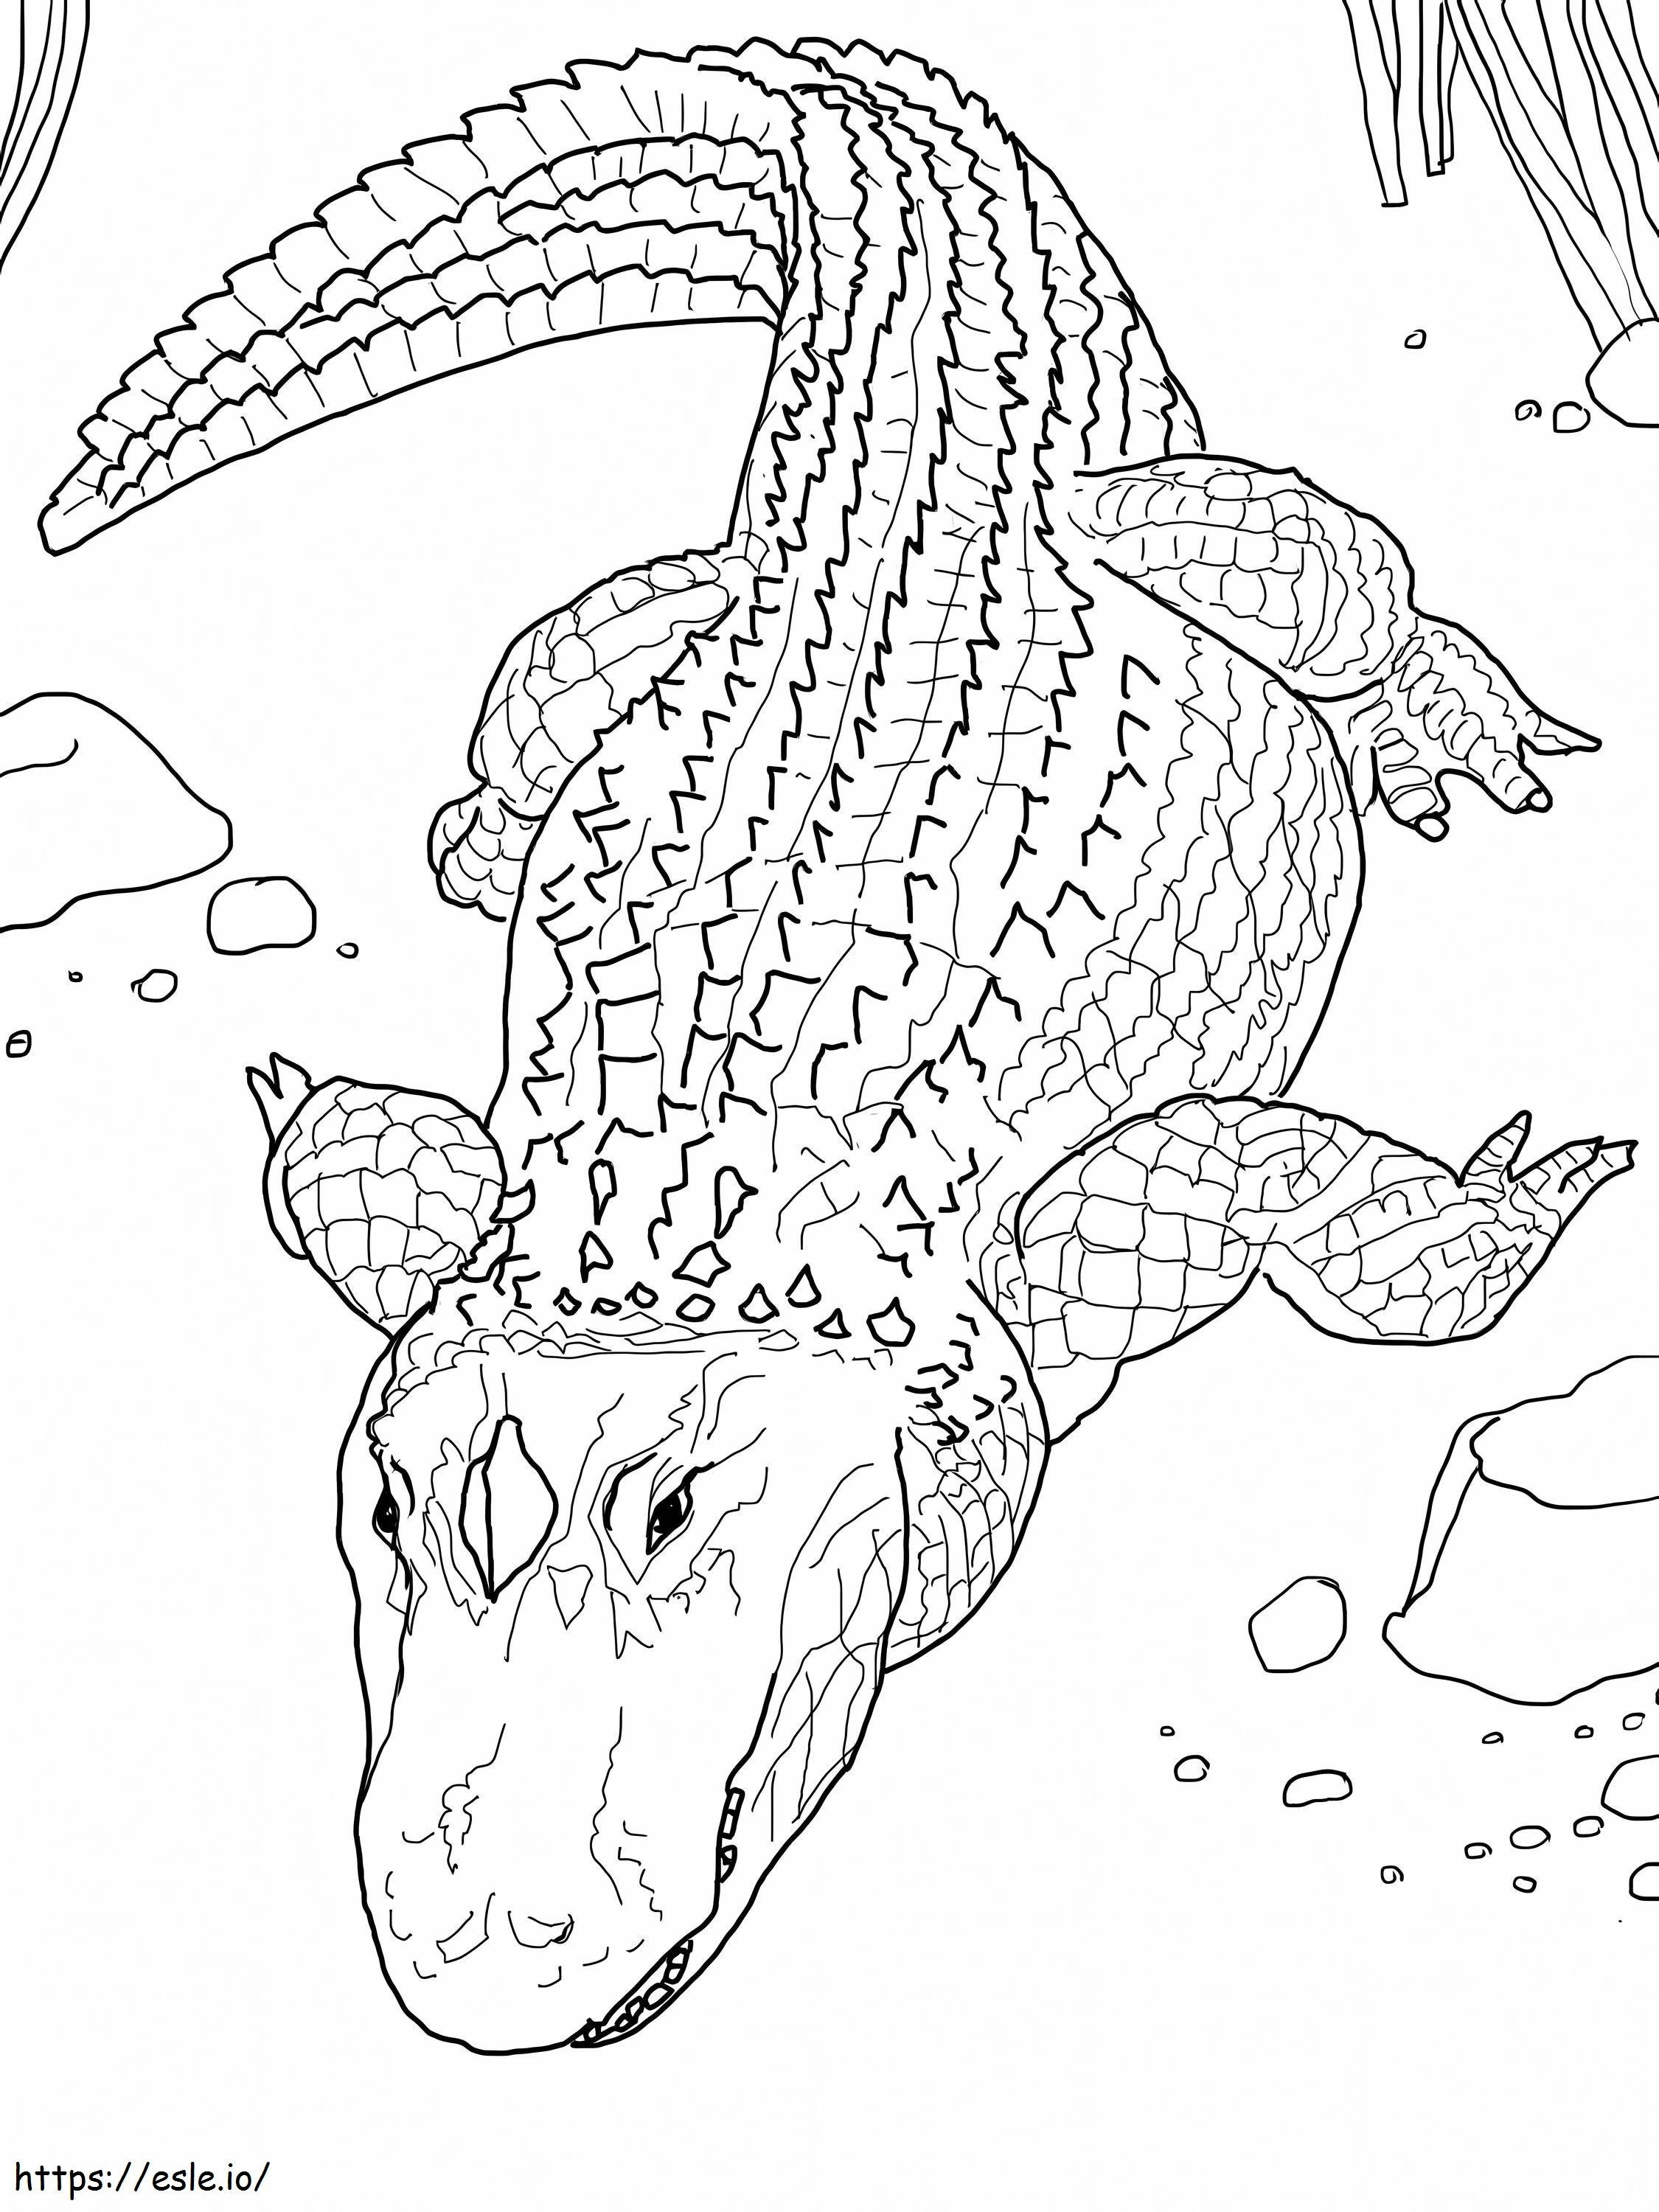 Crocodile Free Images coloring page